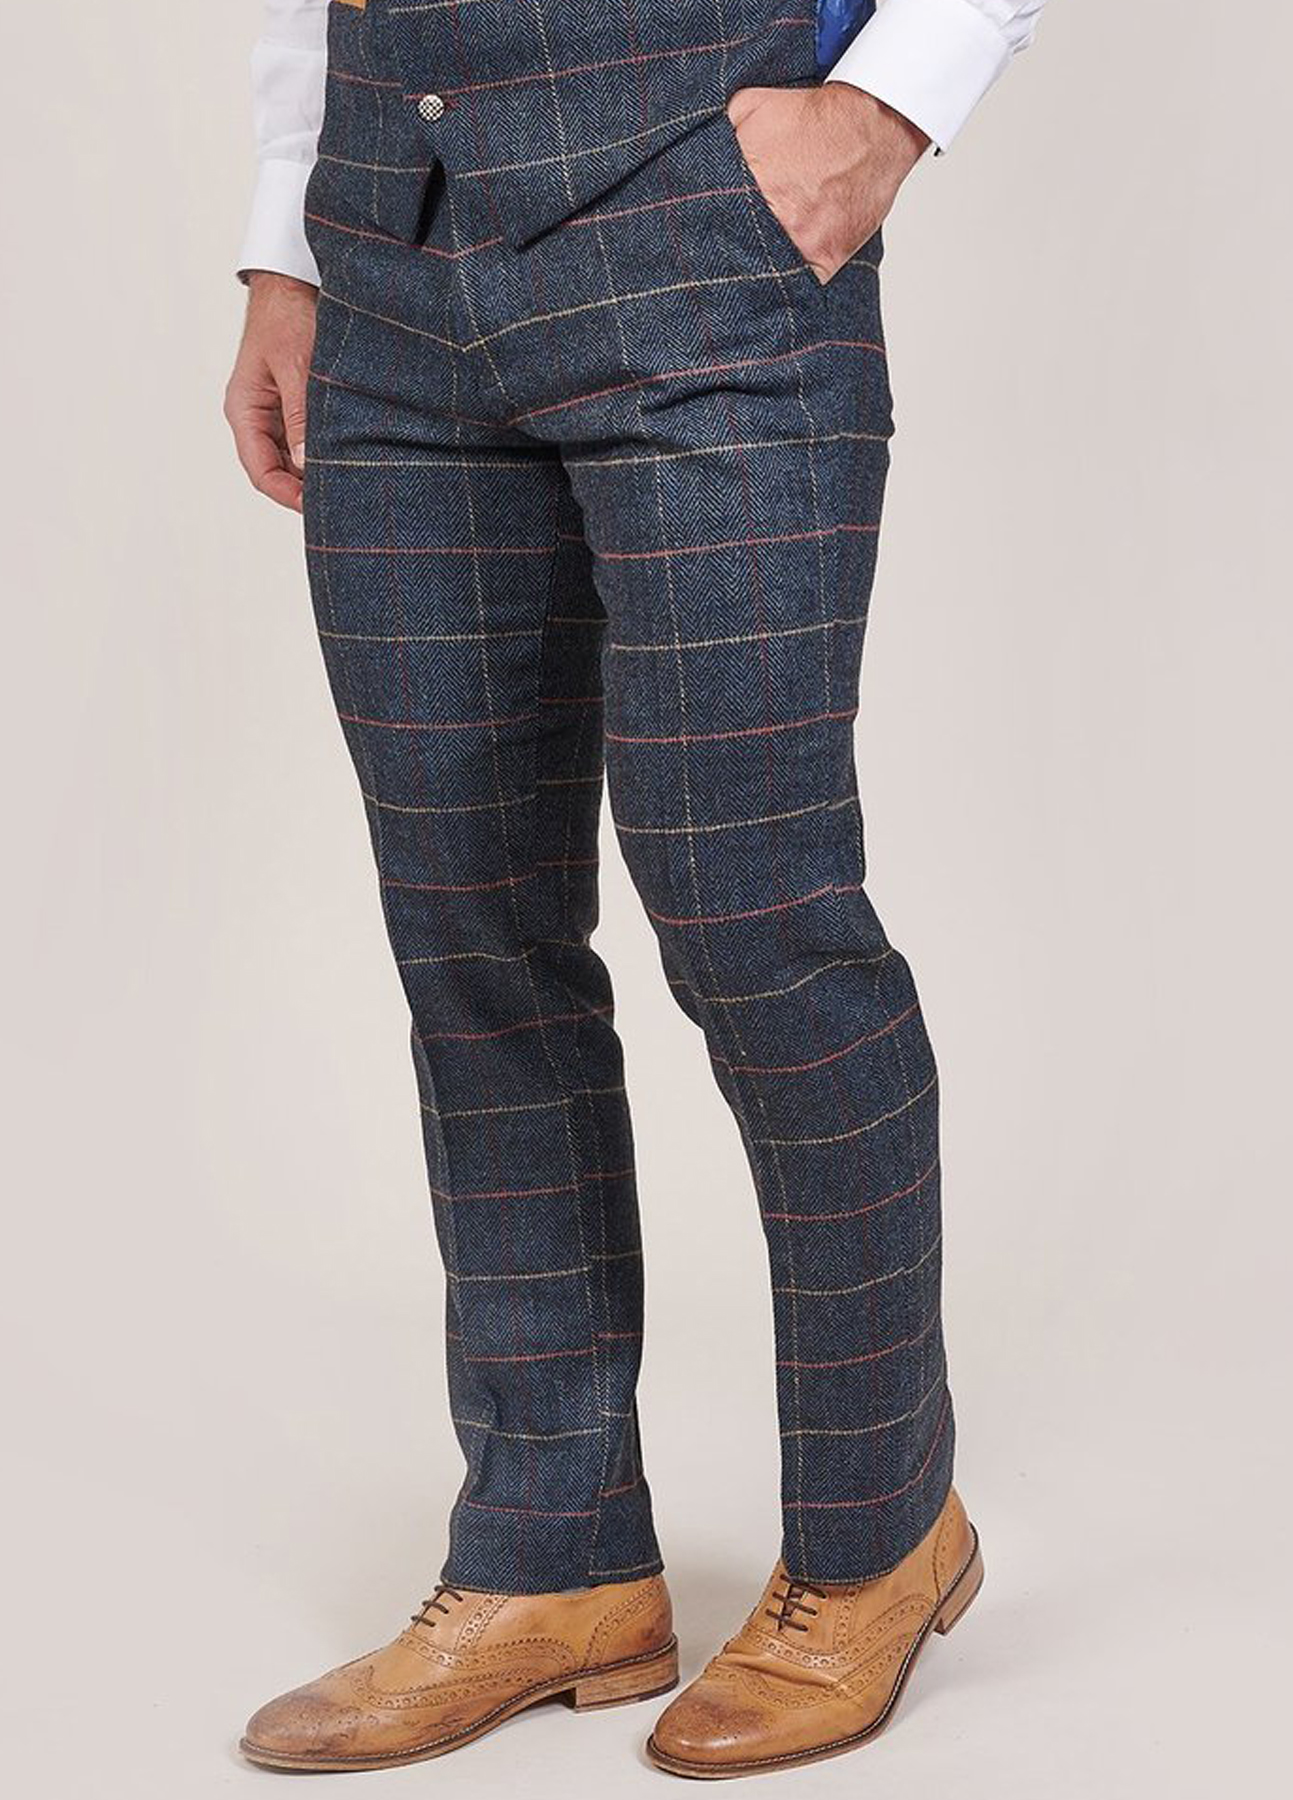 Marc Darcy Eton Navy Tweed Check Trousers Slim Fit | SuitsMe